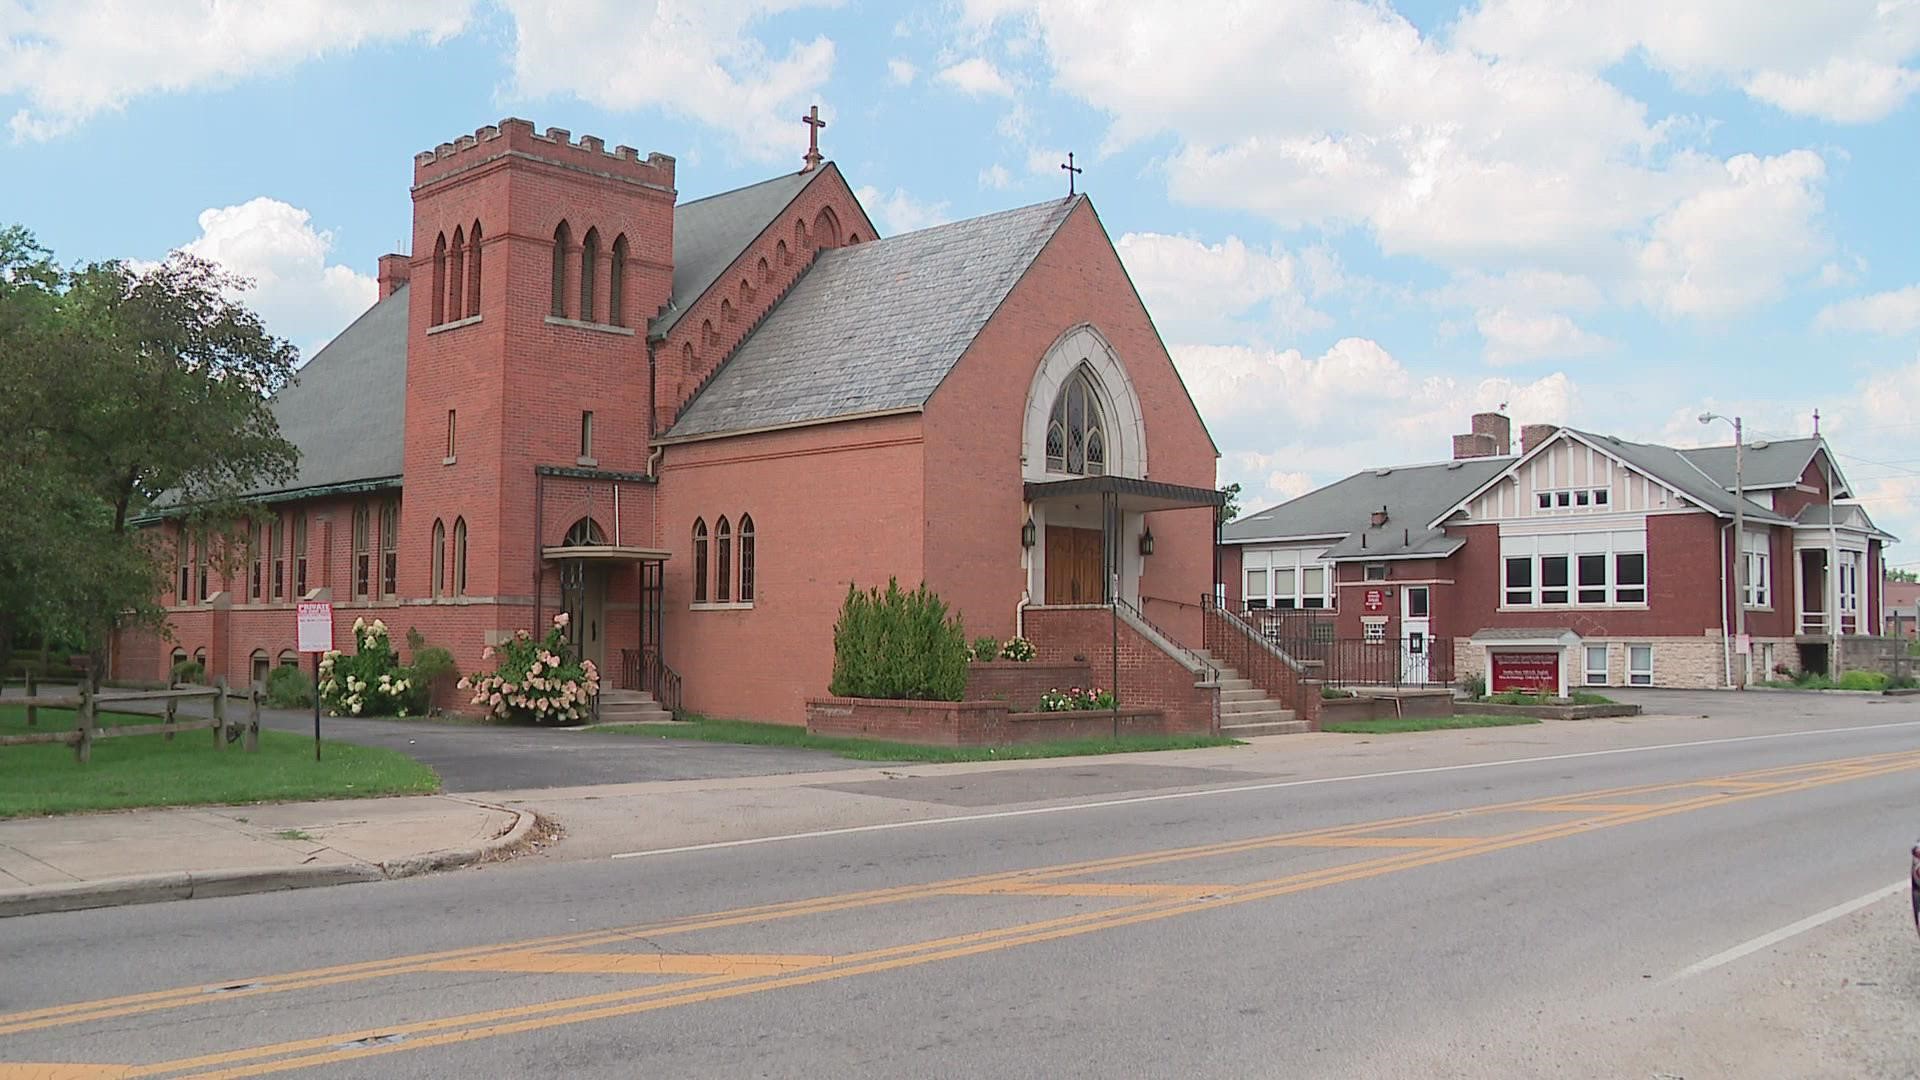 Parishioners say, if St. Thomas were closed it would be a huge loss, not only for them but for the community they serve.